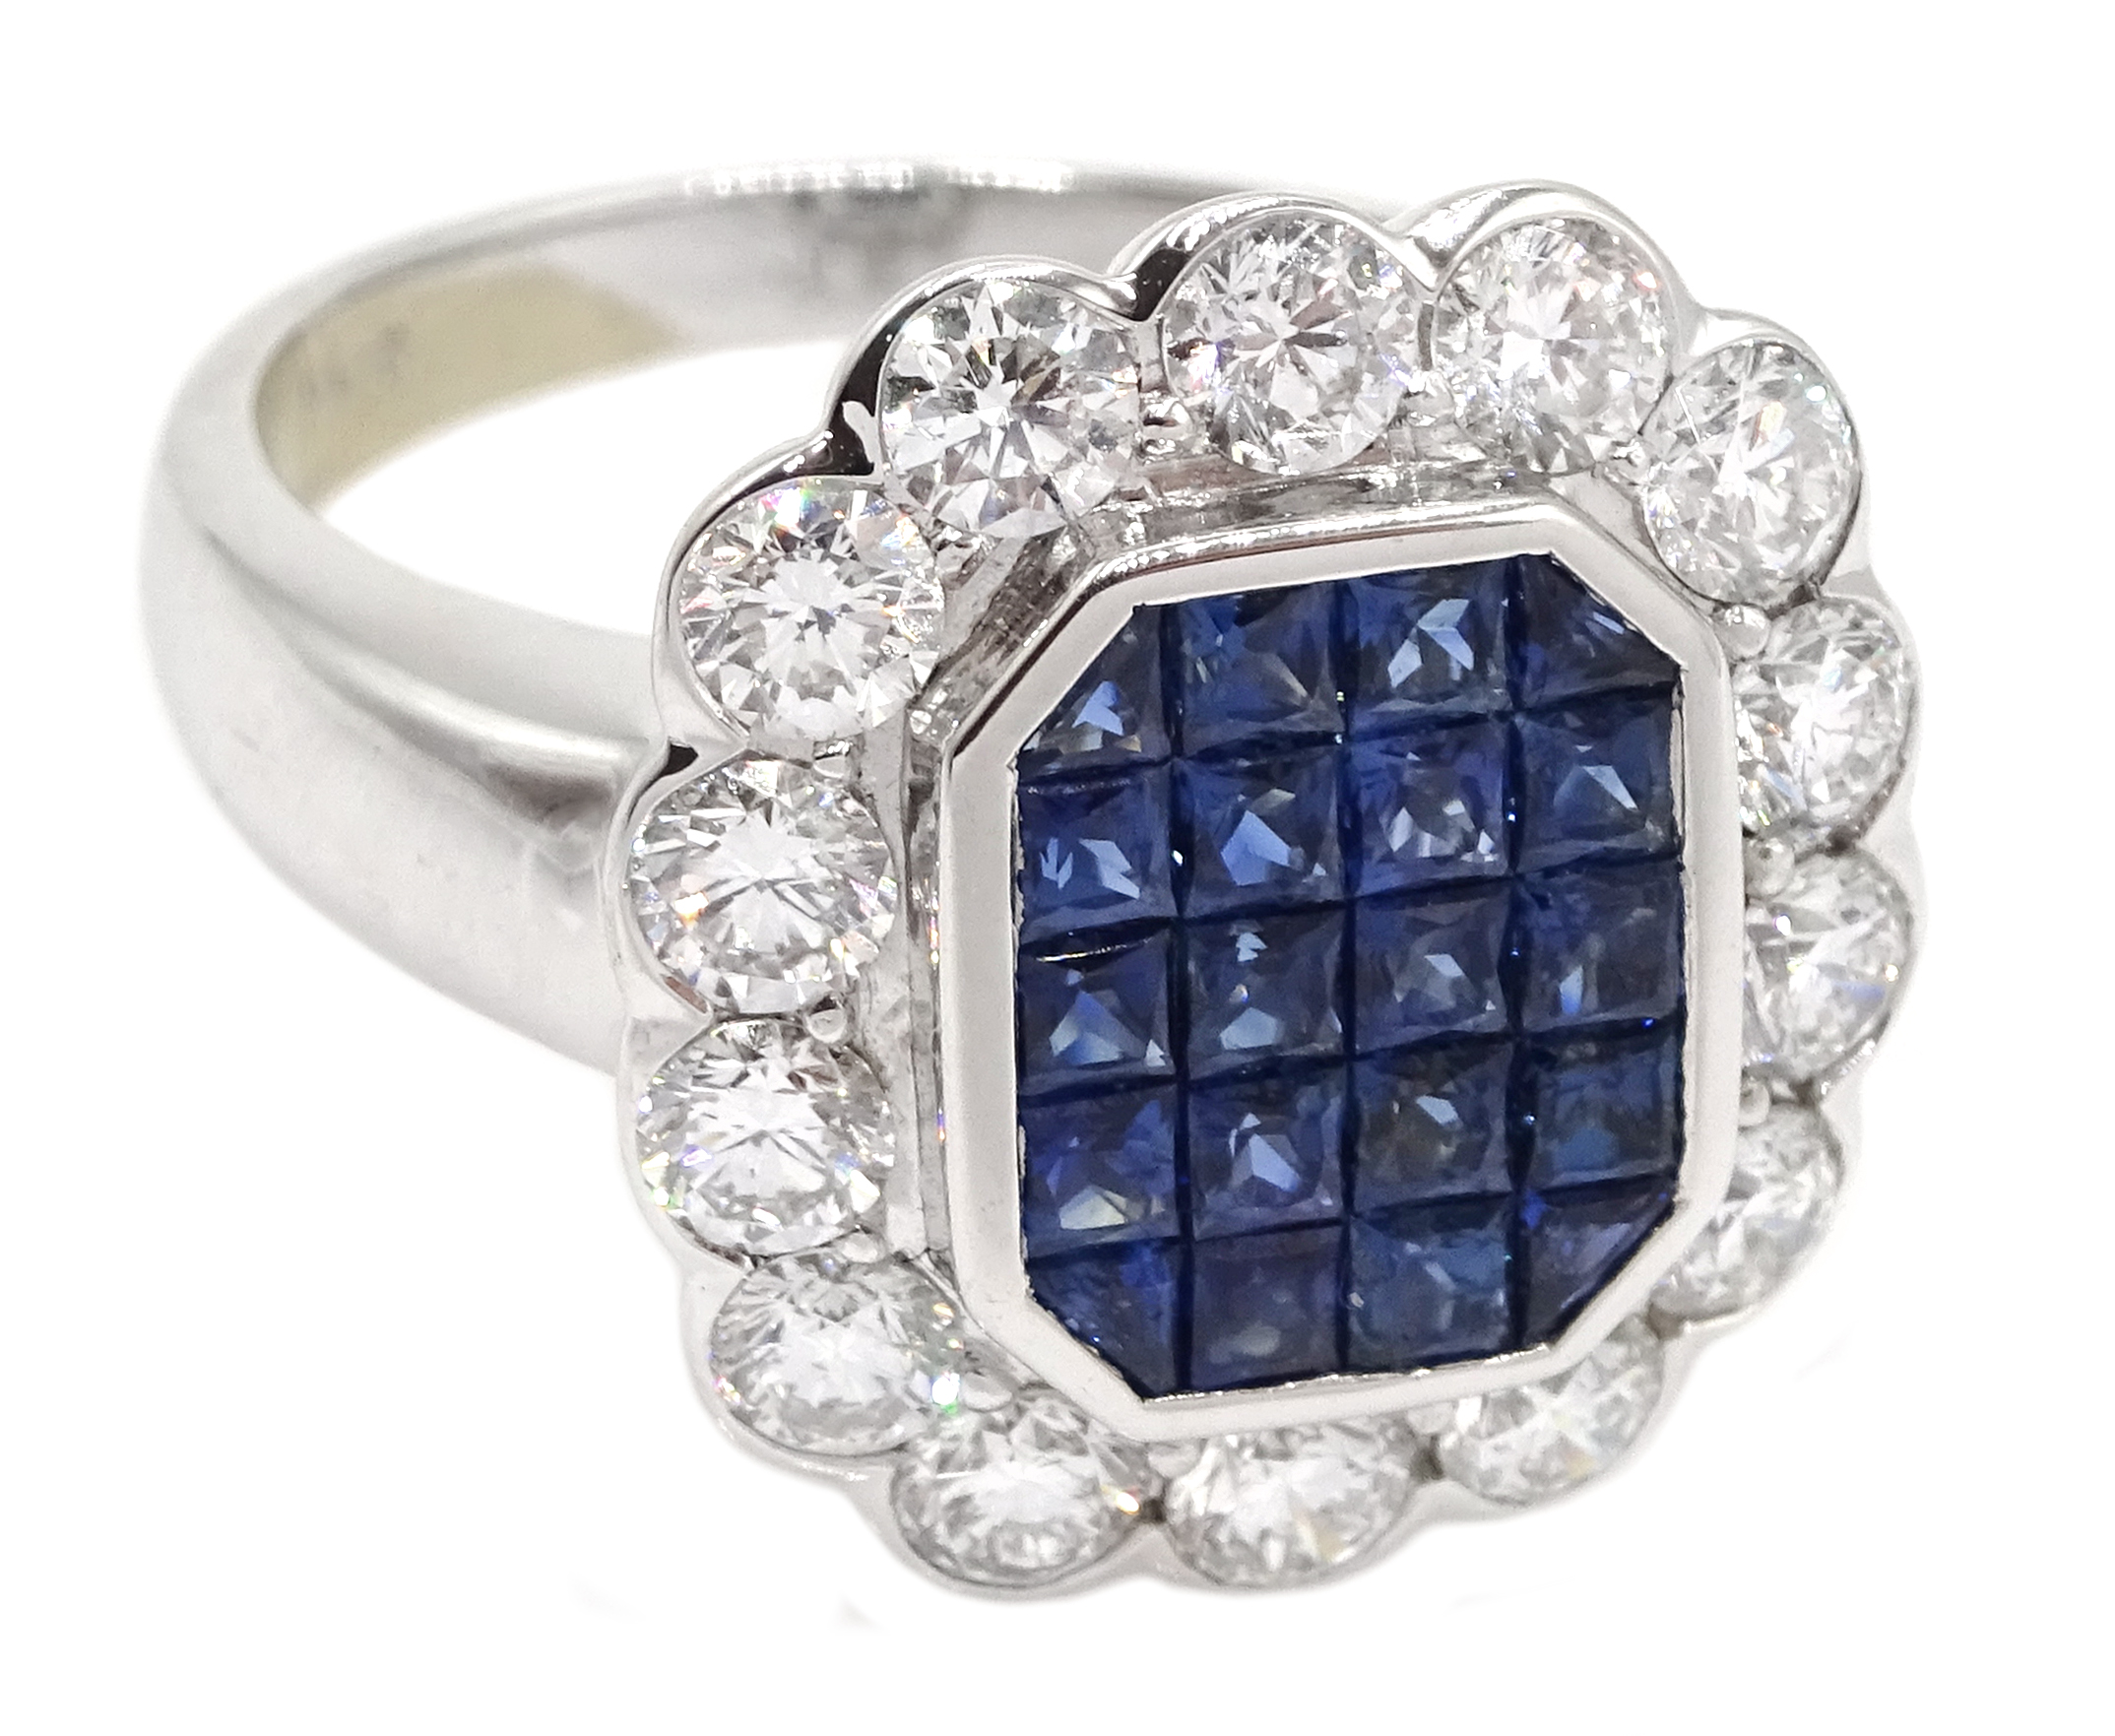 18ct white gold, sapphire and diamond cluster ring - Image 3 of 5